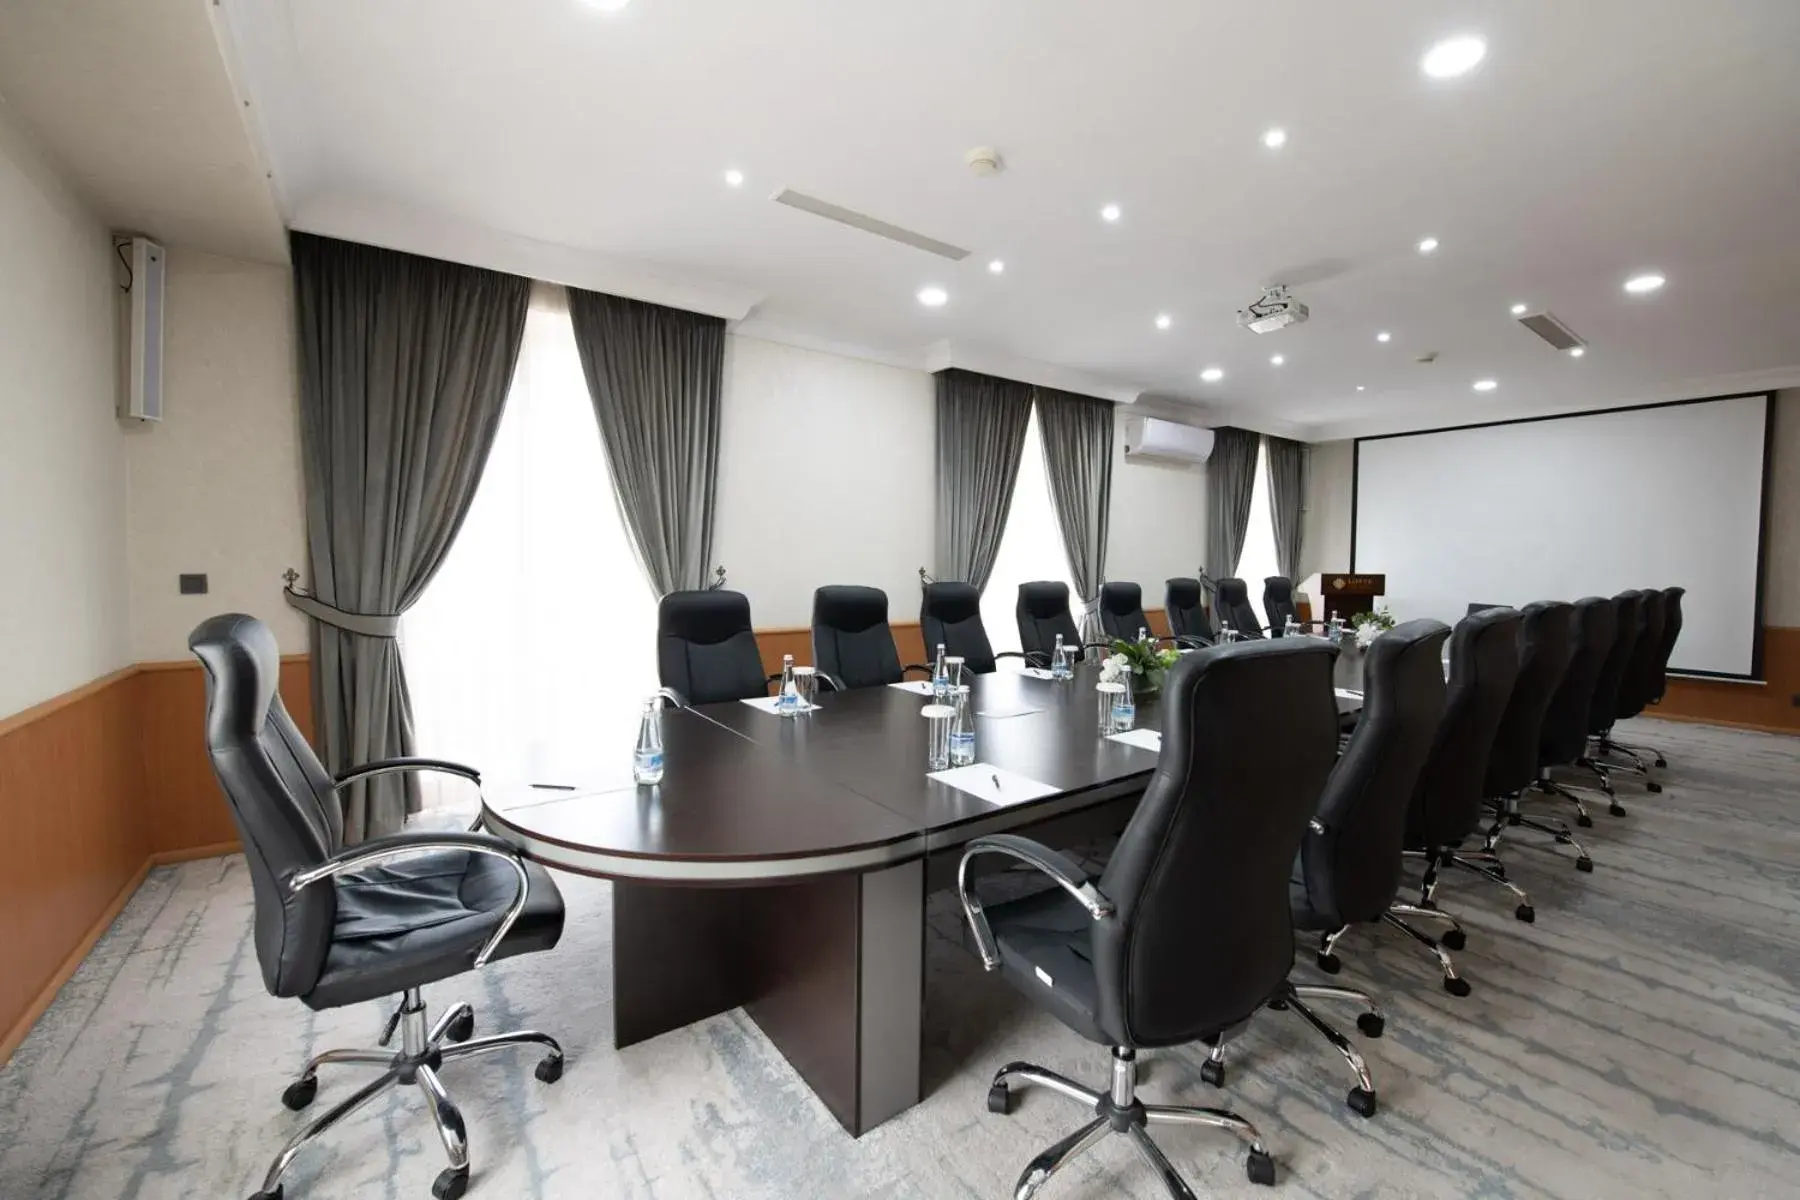 Meeting/conference room in Tashkent Palace Hotel